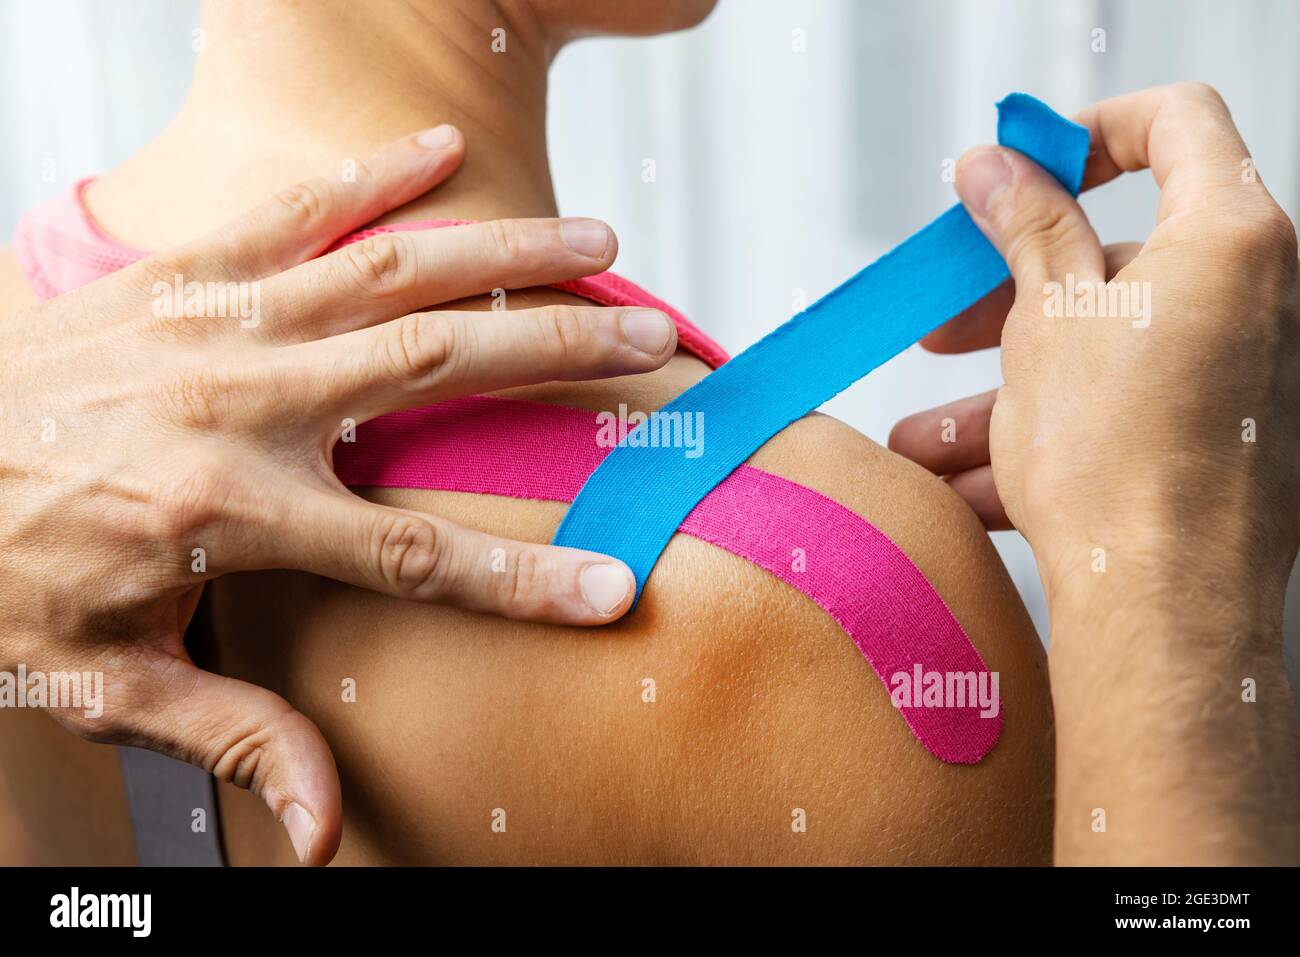 kinesiotaping - physiotherapist taping injured patient shoulder with kinesio tape after muscle injury Stock Photo